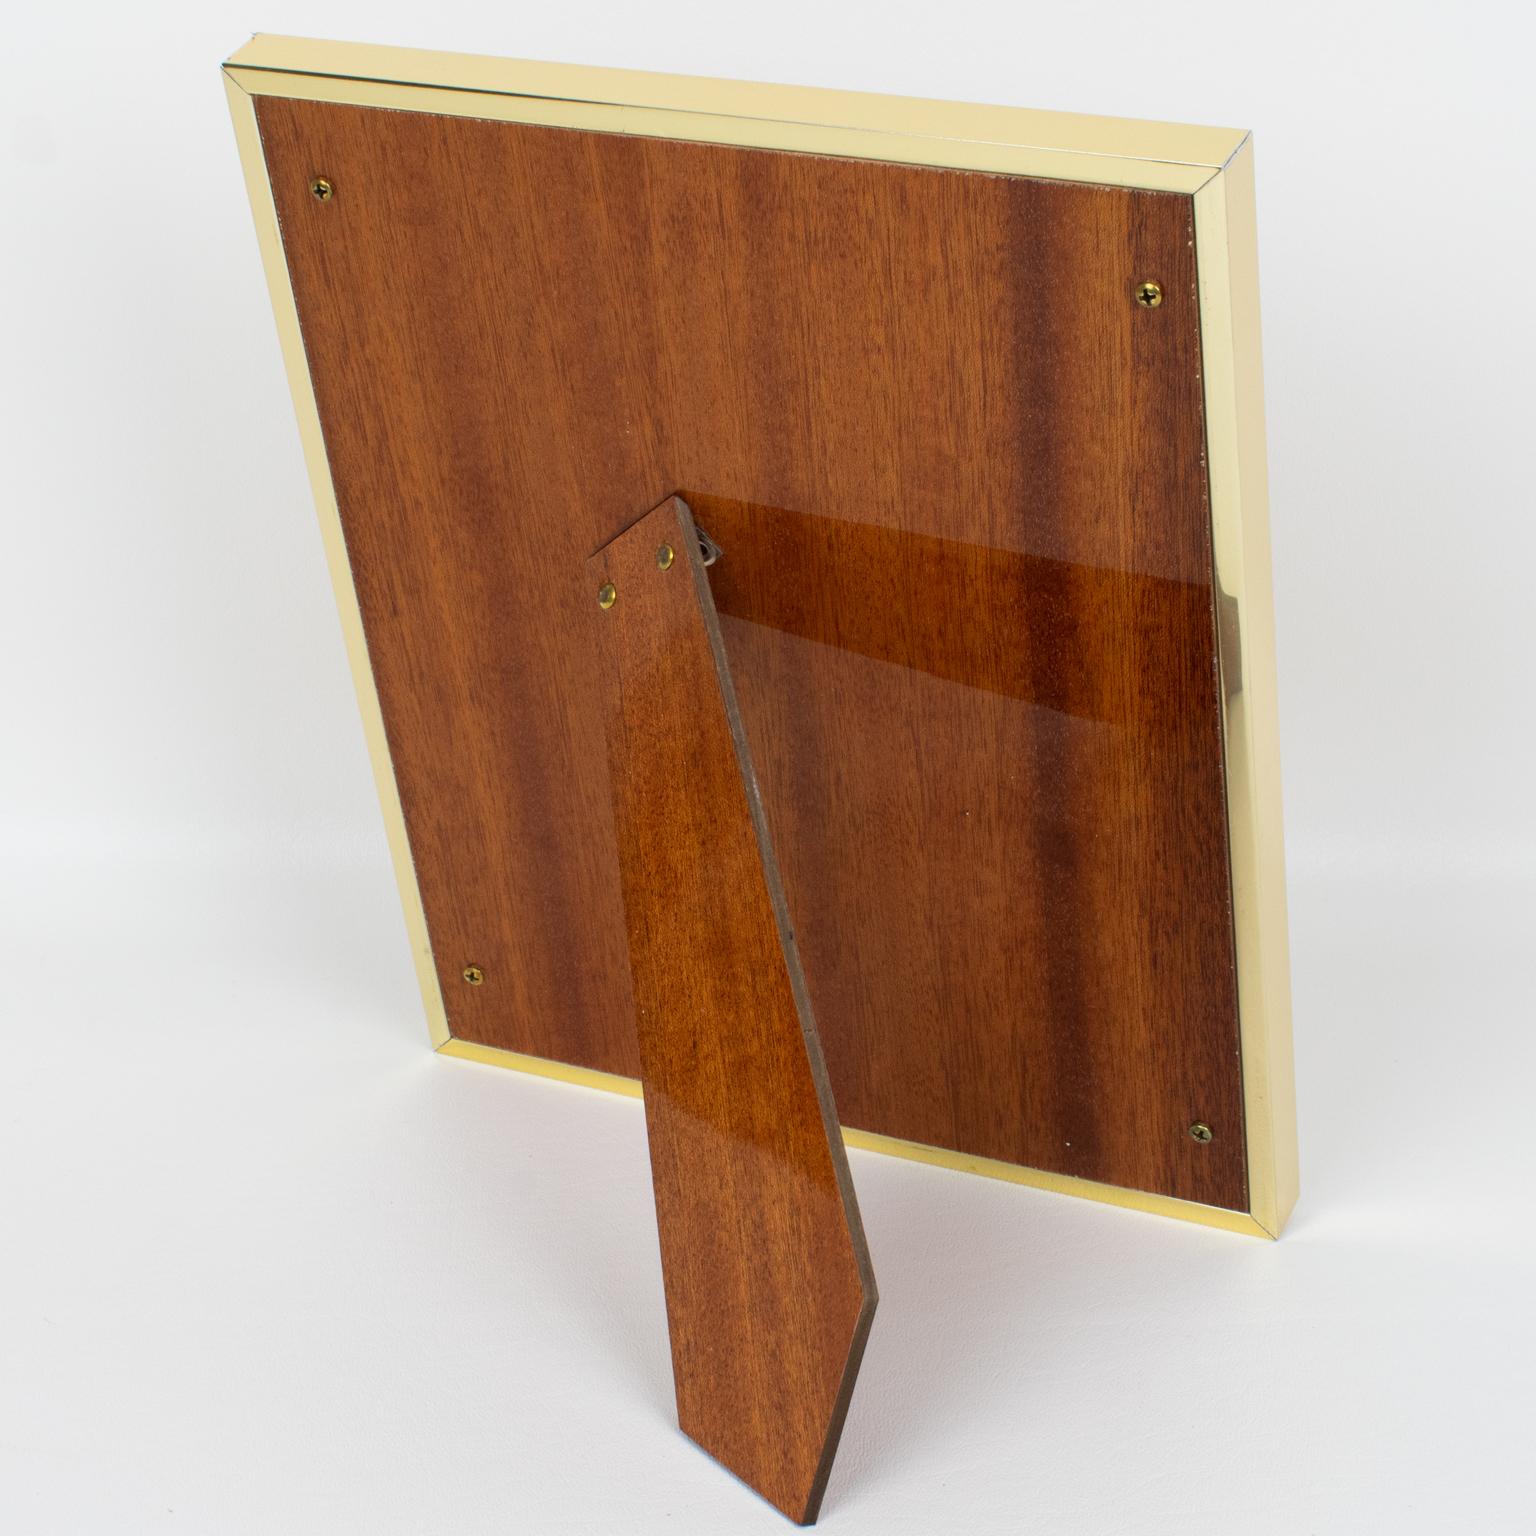 Montagnani Italy Walnut Wood and Metal Picture Frame, 1970s In Excellent Condition For Sale In Atlanta, GA